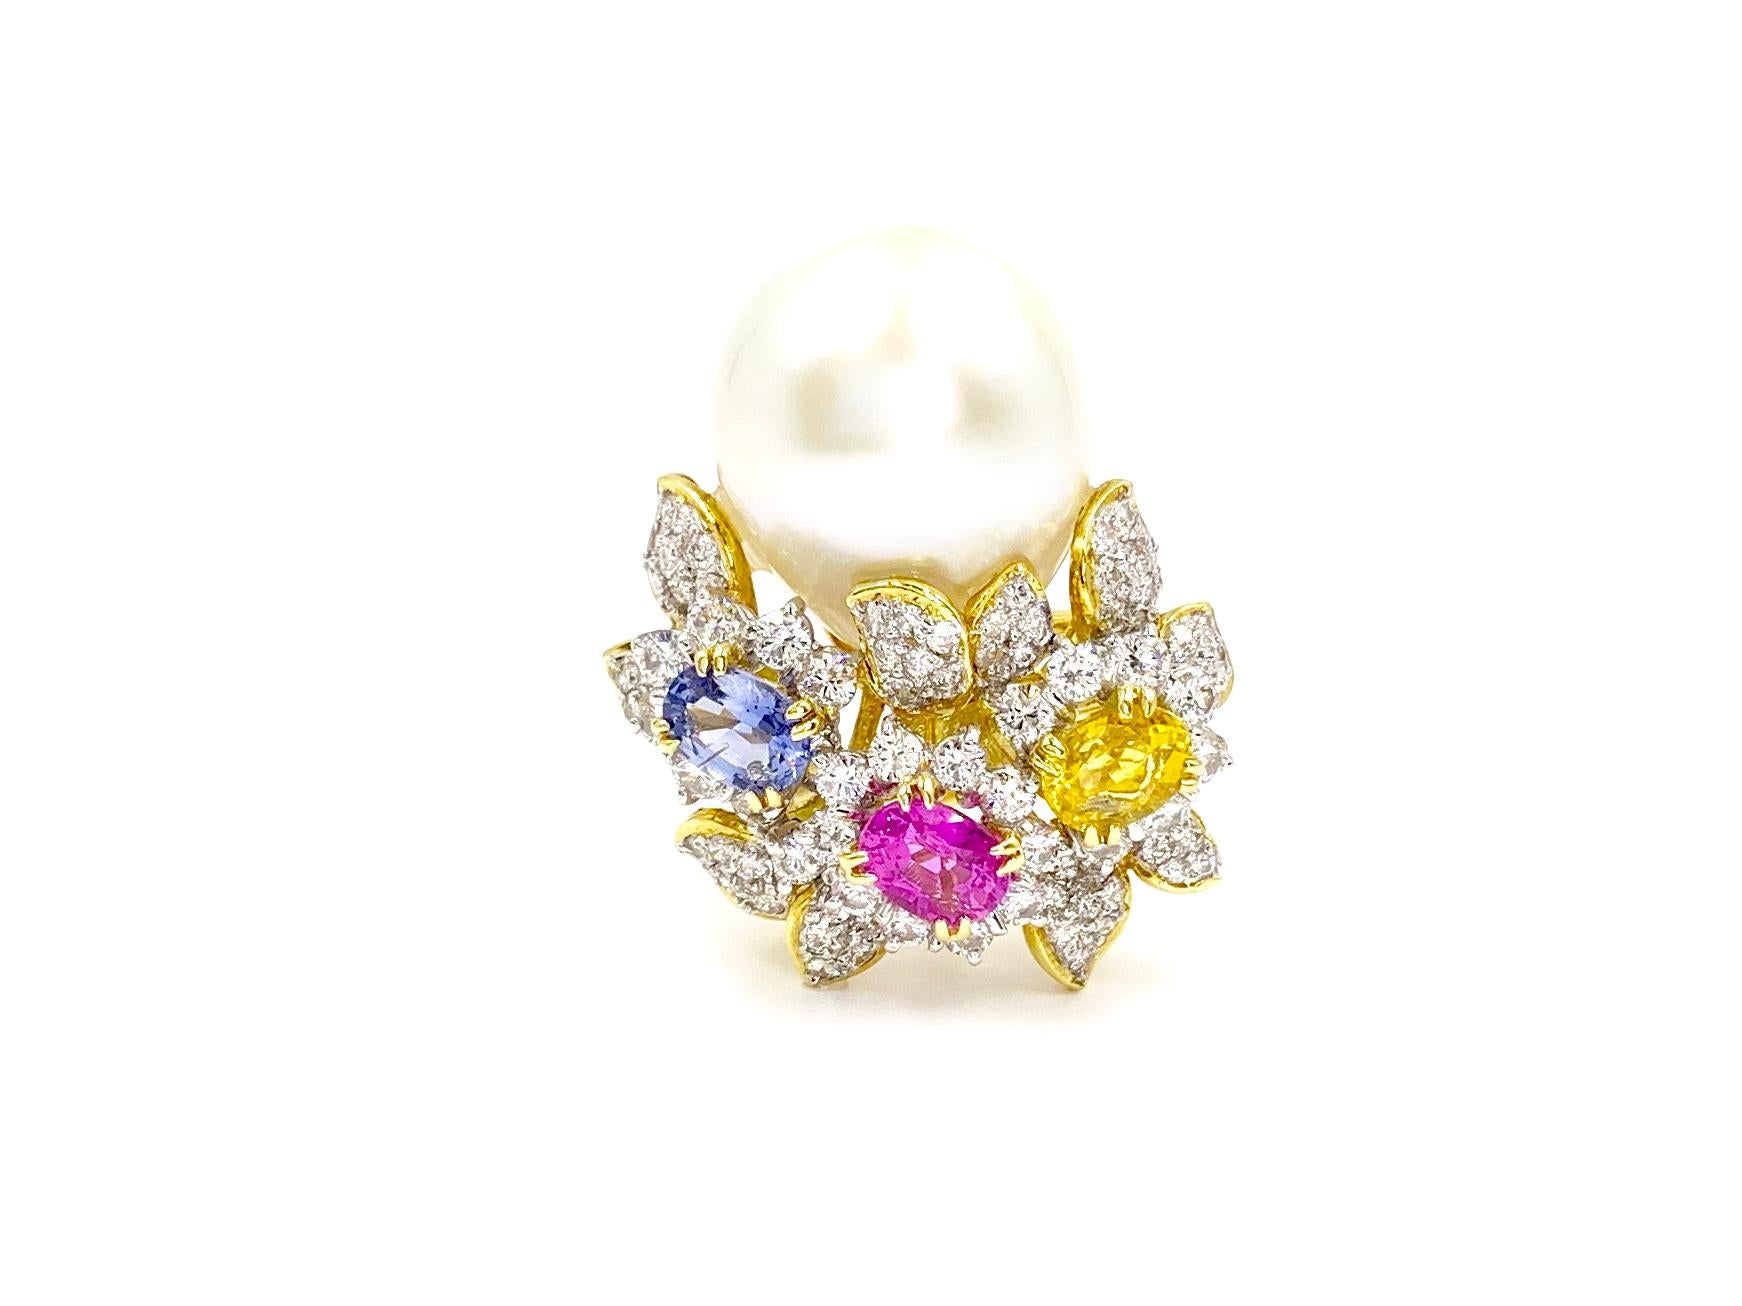 A substantial, high quality 18 karat gold floral cocktail ring featuring a 14.9mm genuine ivory south sea pearl, 2.27 carats of sapphires and 1.49 carats of bright white diamonds. Pearl is smooth with a natural shape and beautiful luster. Pink, blue